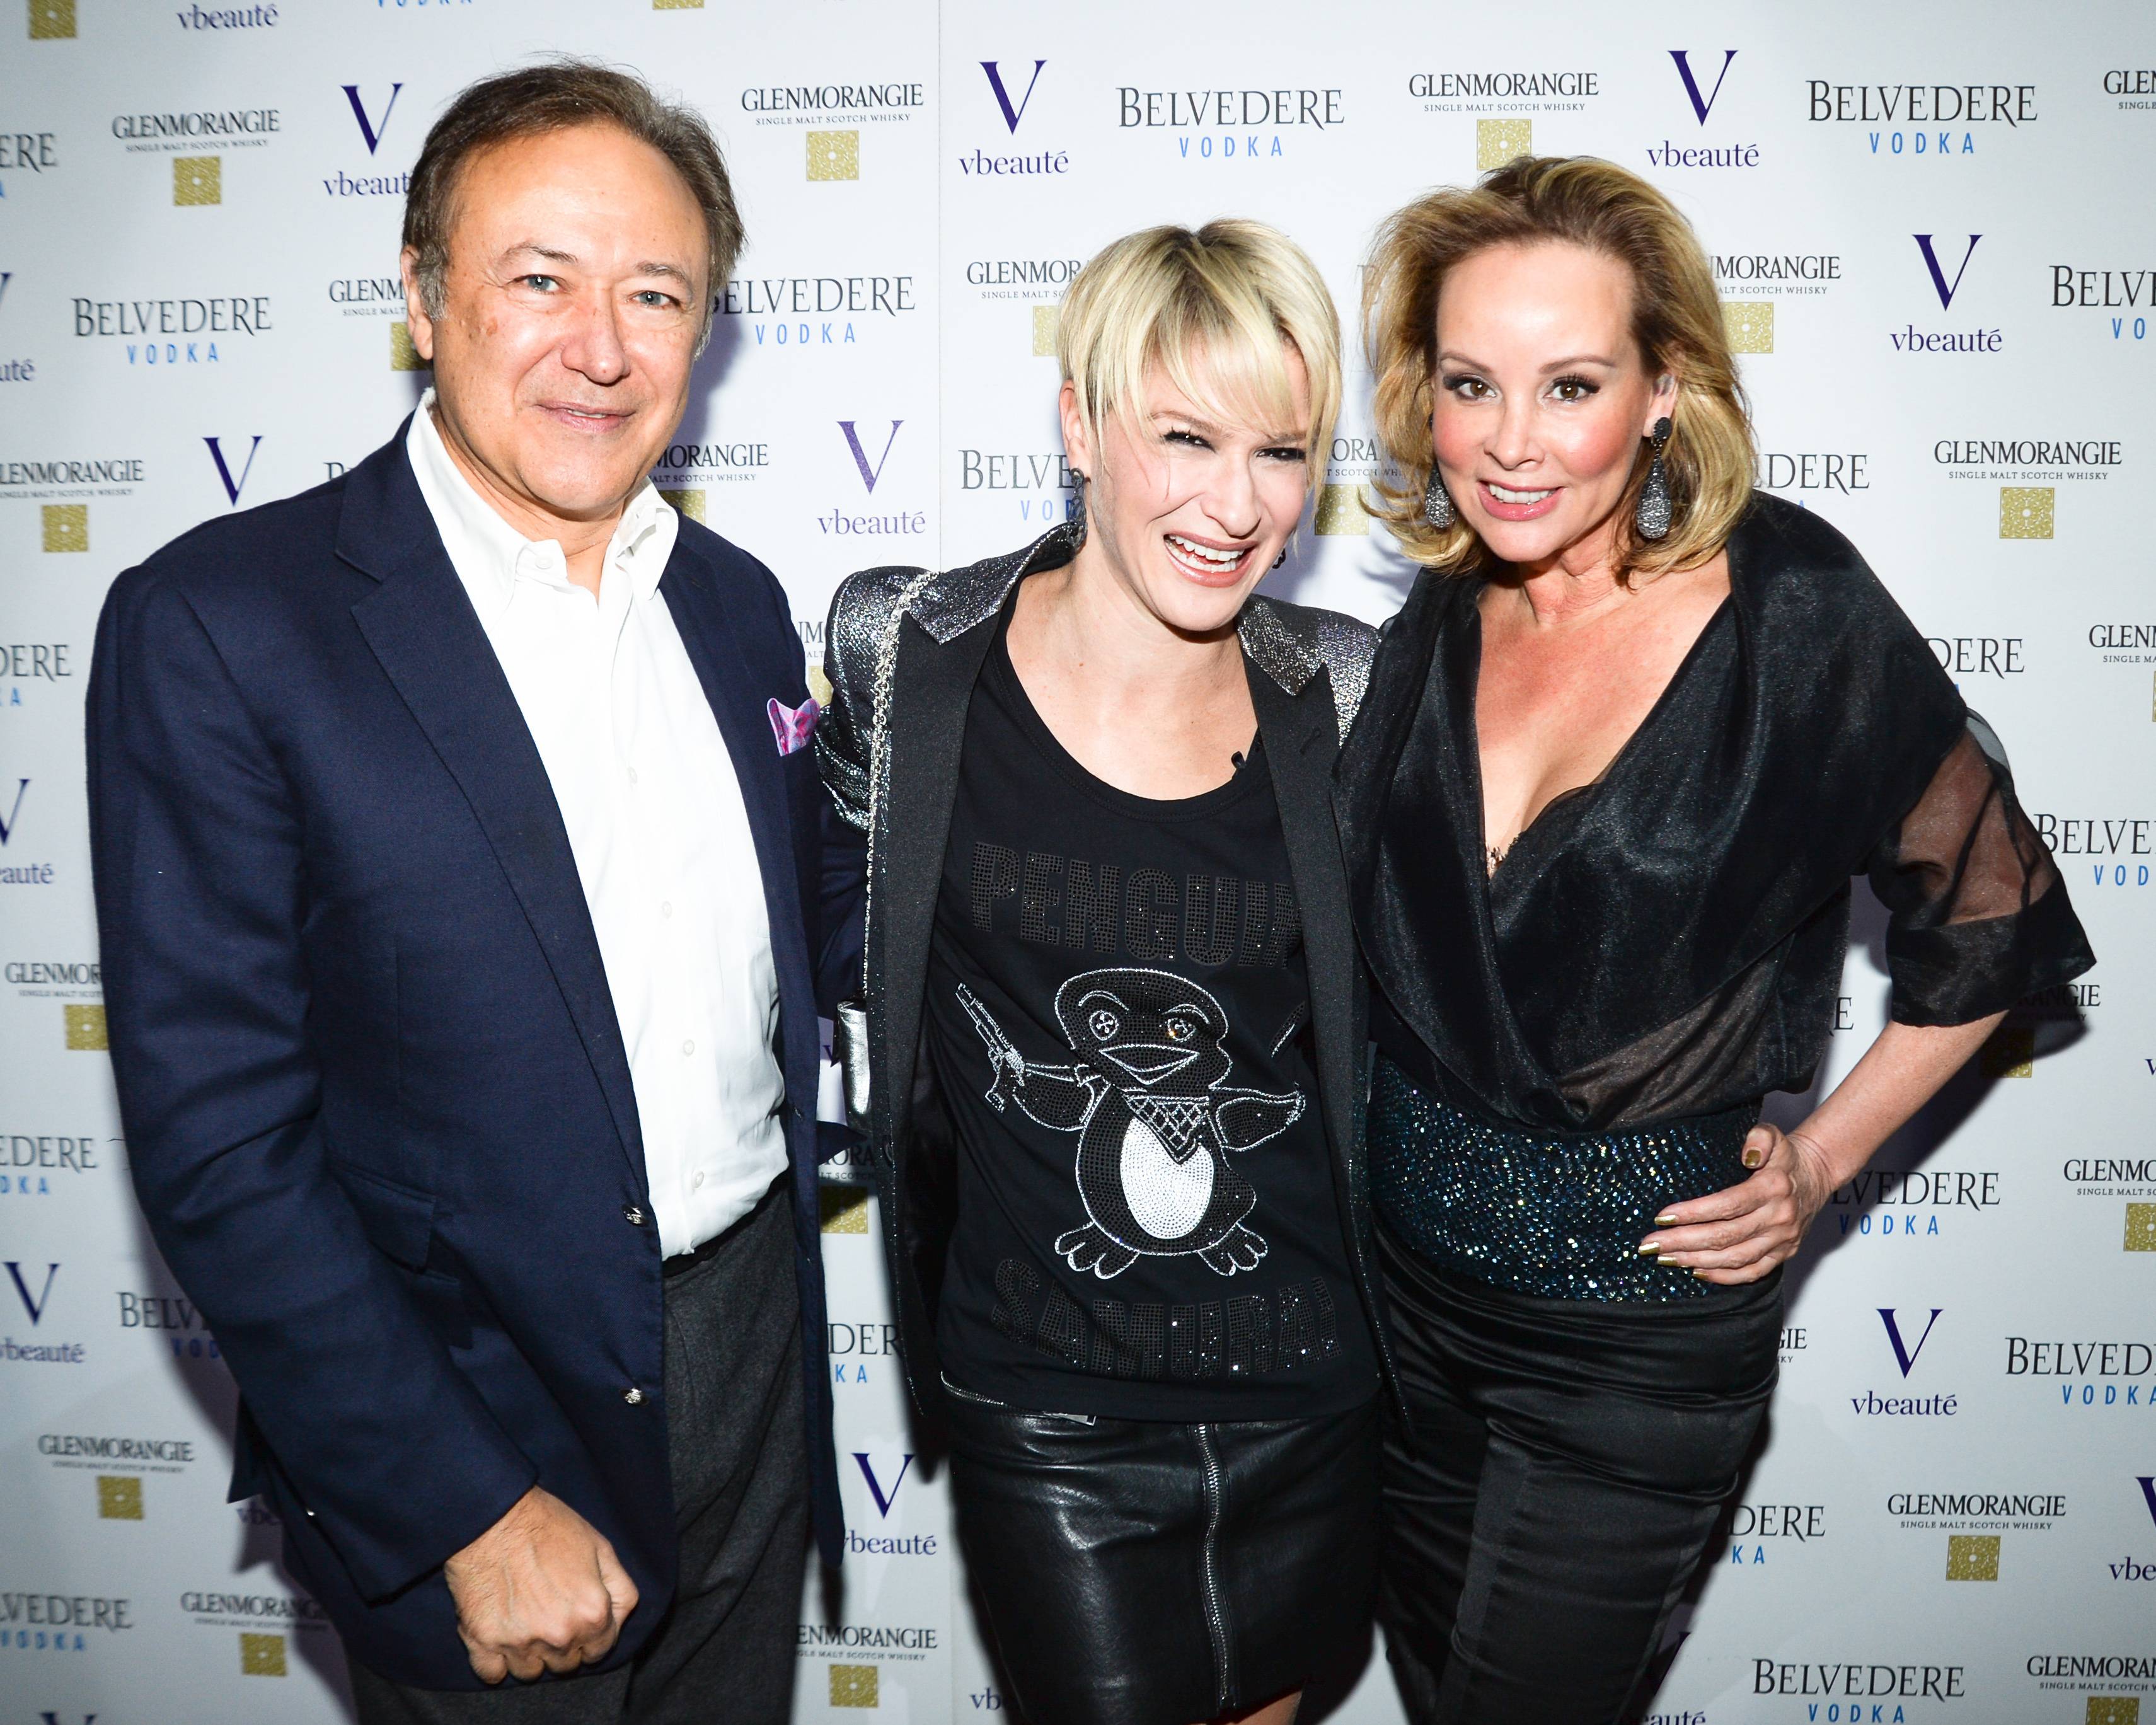 JULIE MACKLOWE and VBEAUTE's Joint Birthday Party